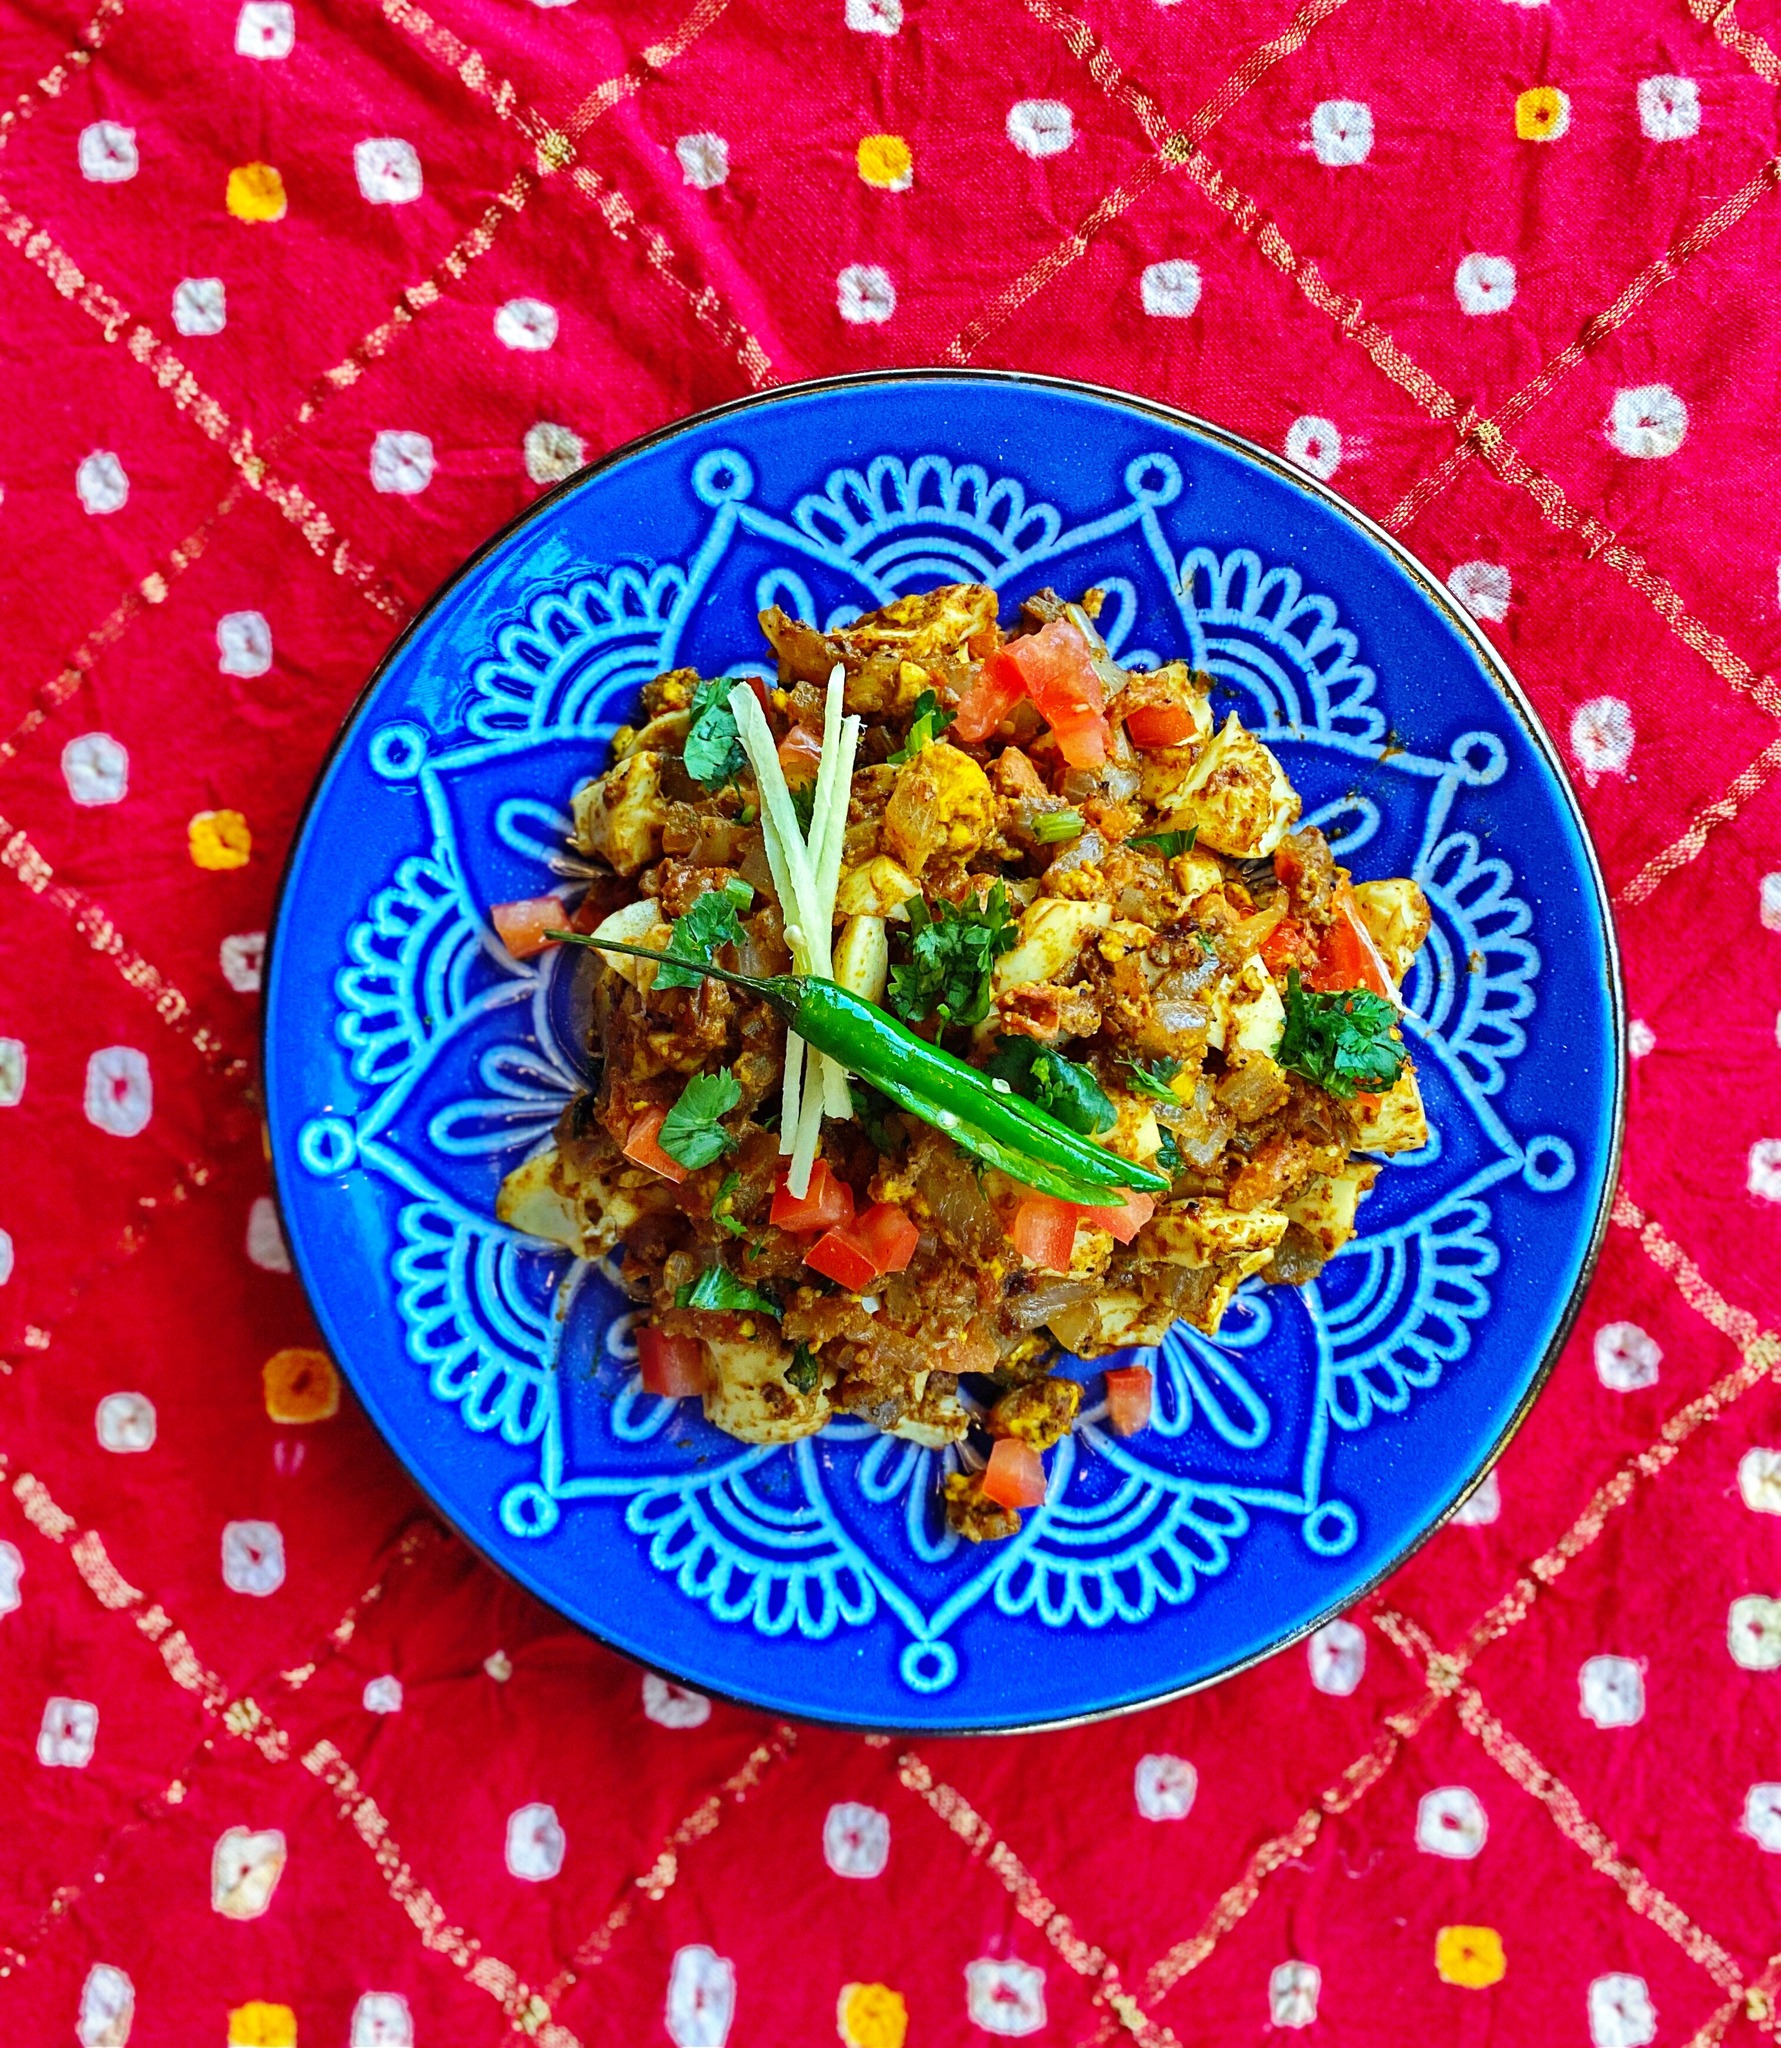 Shredded egg tossed with veggies and southern Indian spices on a bright blue plate sitting on a red pattern tablecloth.